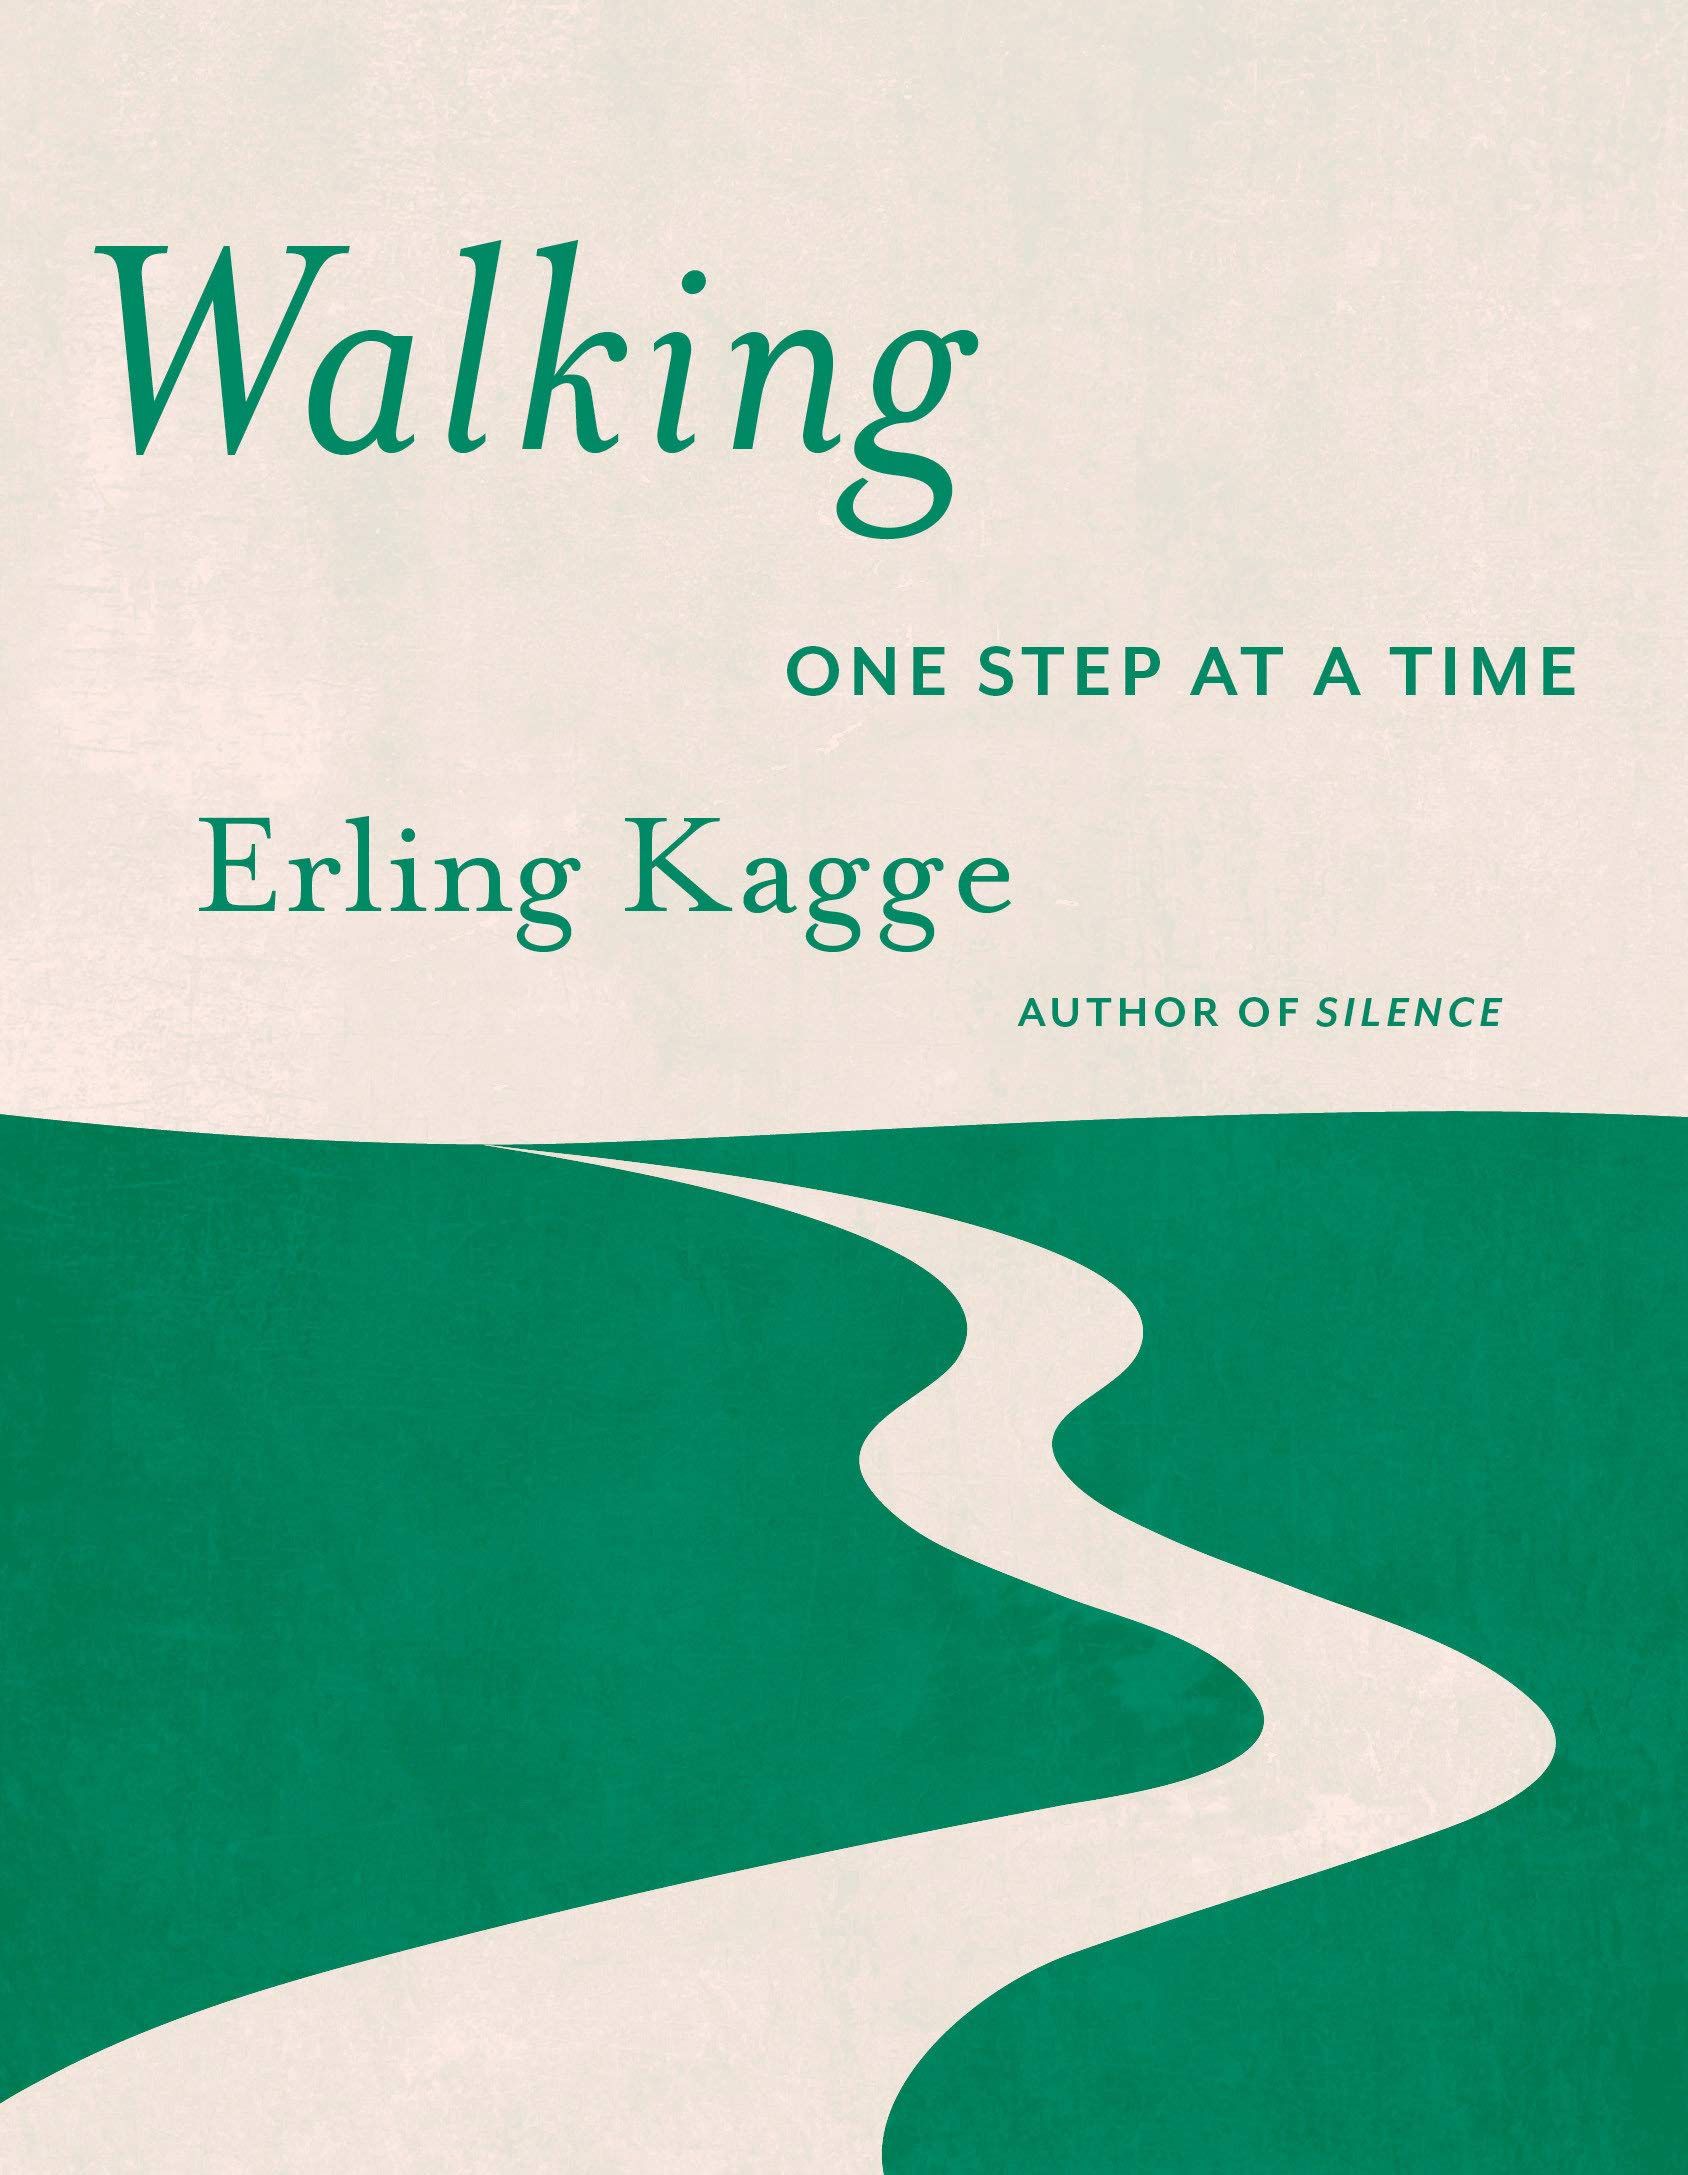 Walking: One Step at a Time book cover